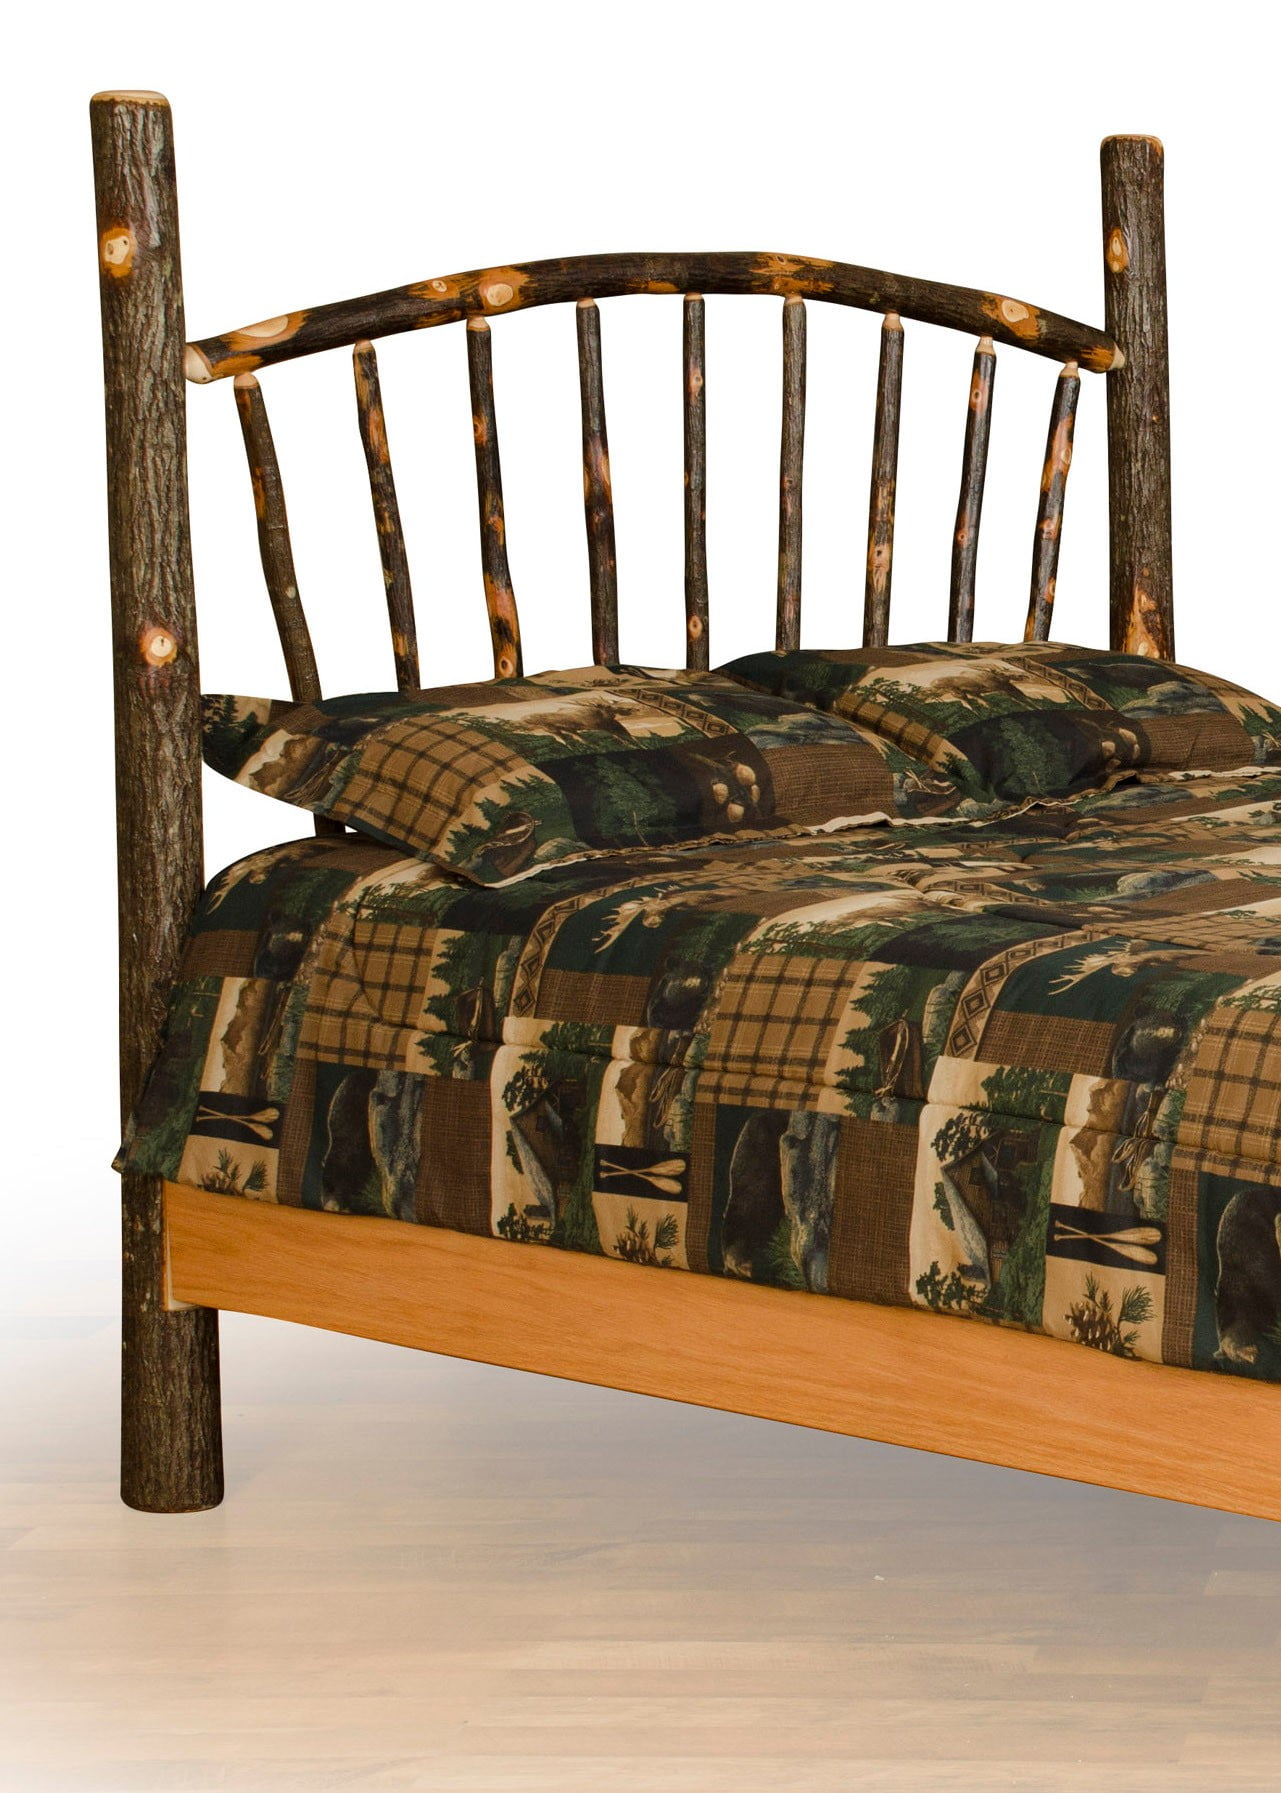 Rustic Hickory Sunburst Headboard Only – Twin / Full / Queen / King